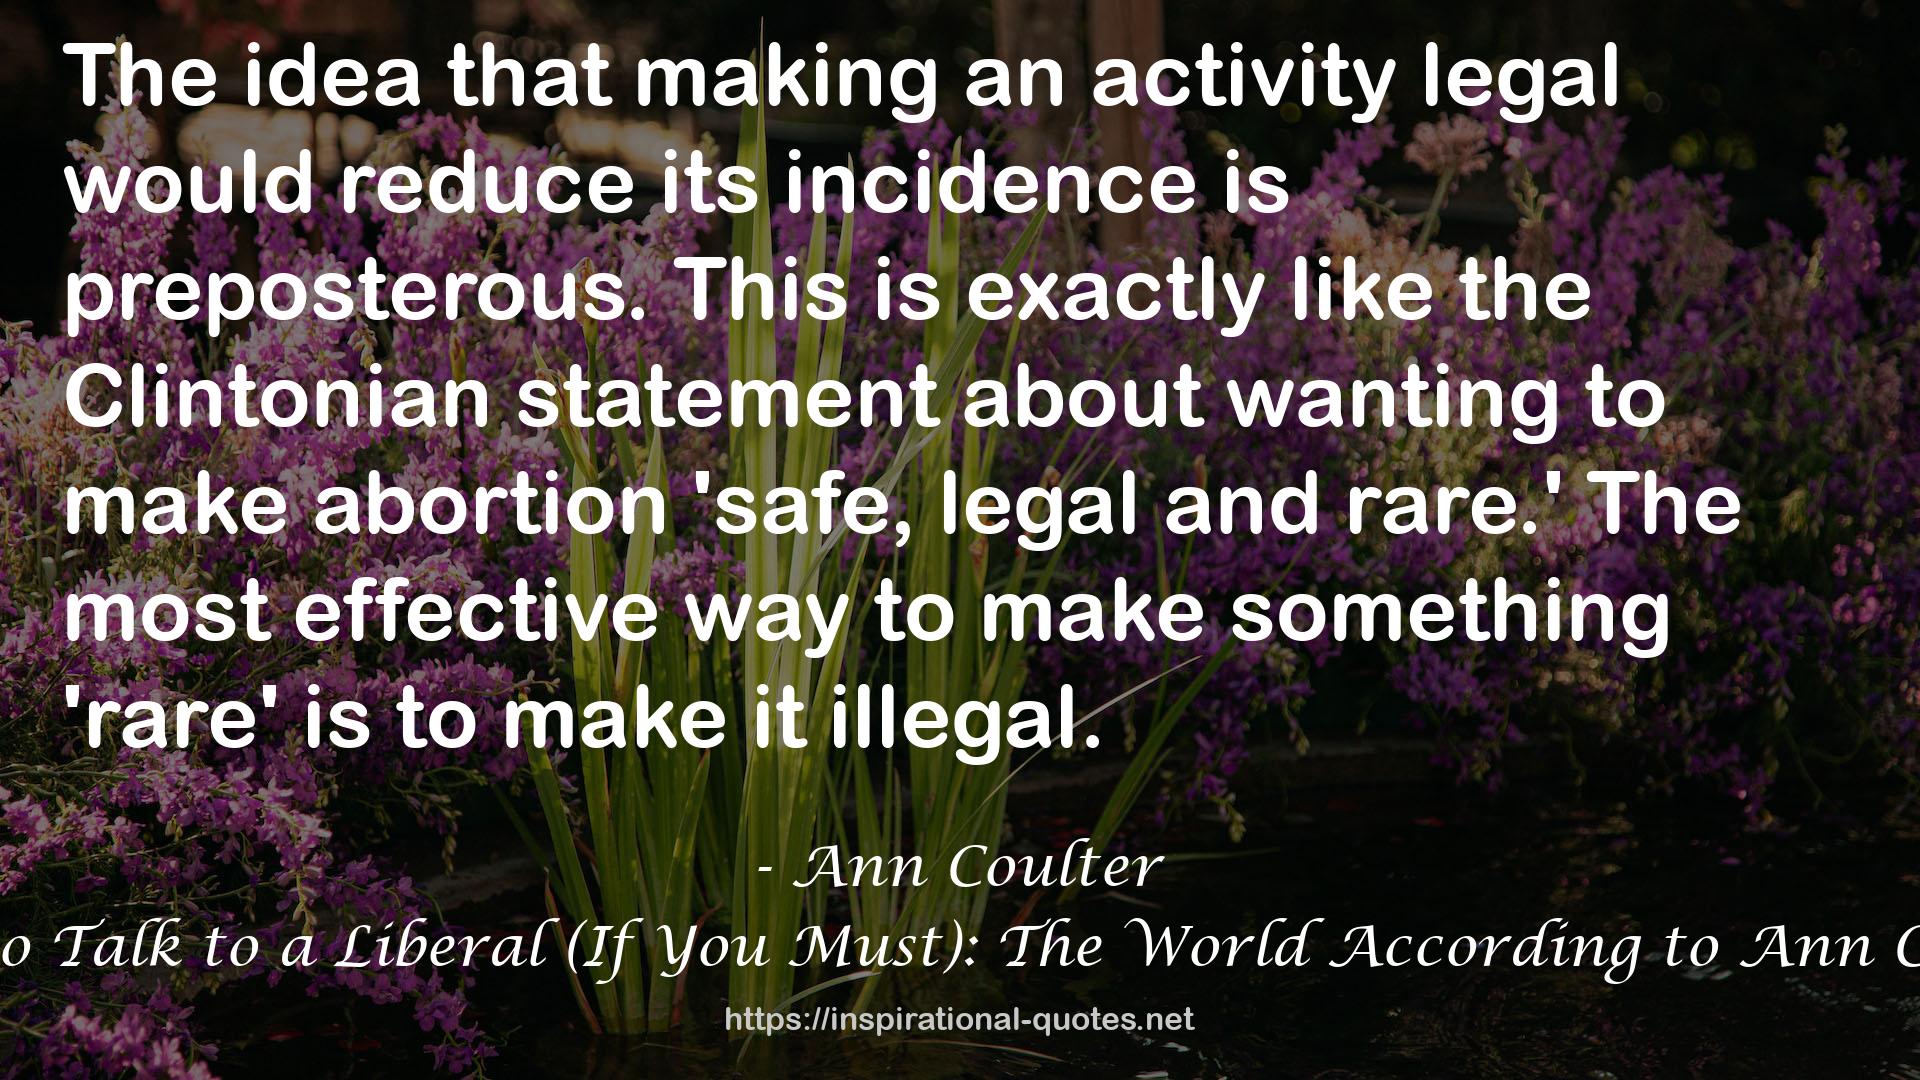 How to Talk to a Liberal (If You Must): The World According to Ann Coulter QUOTES